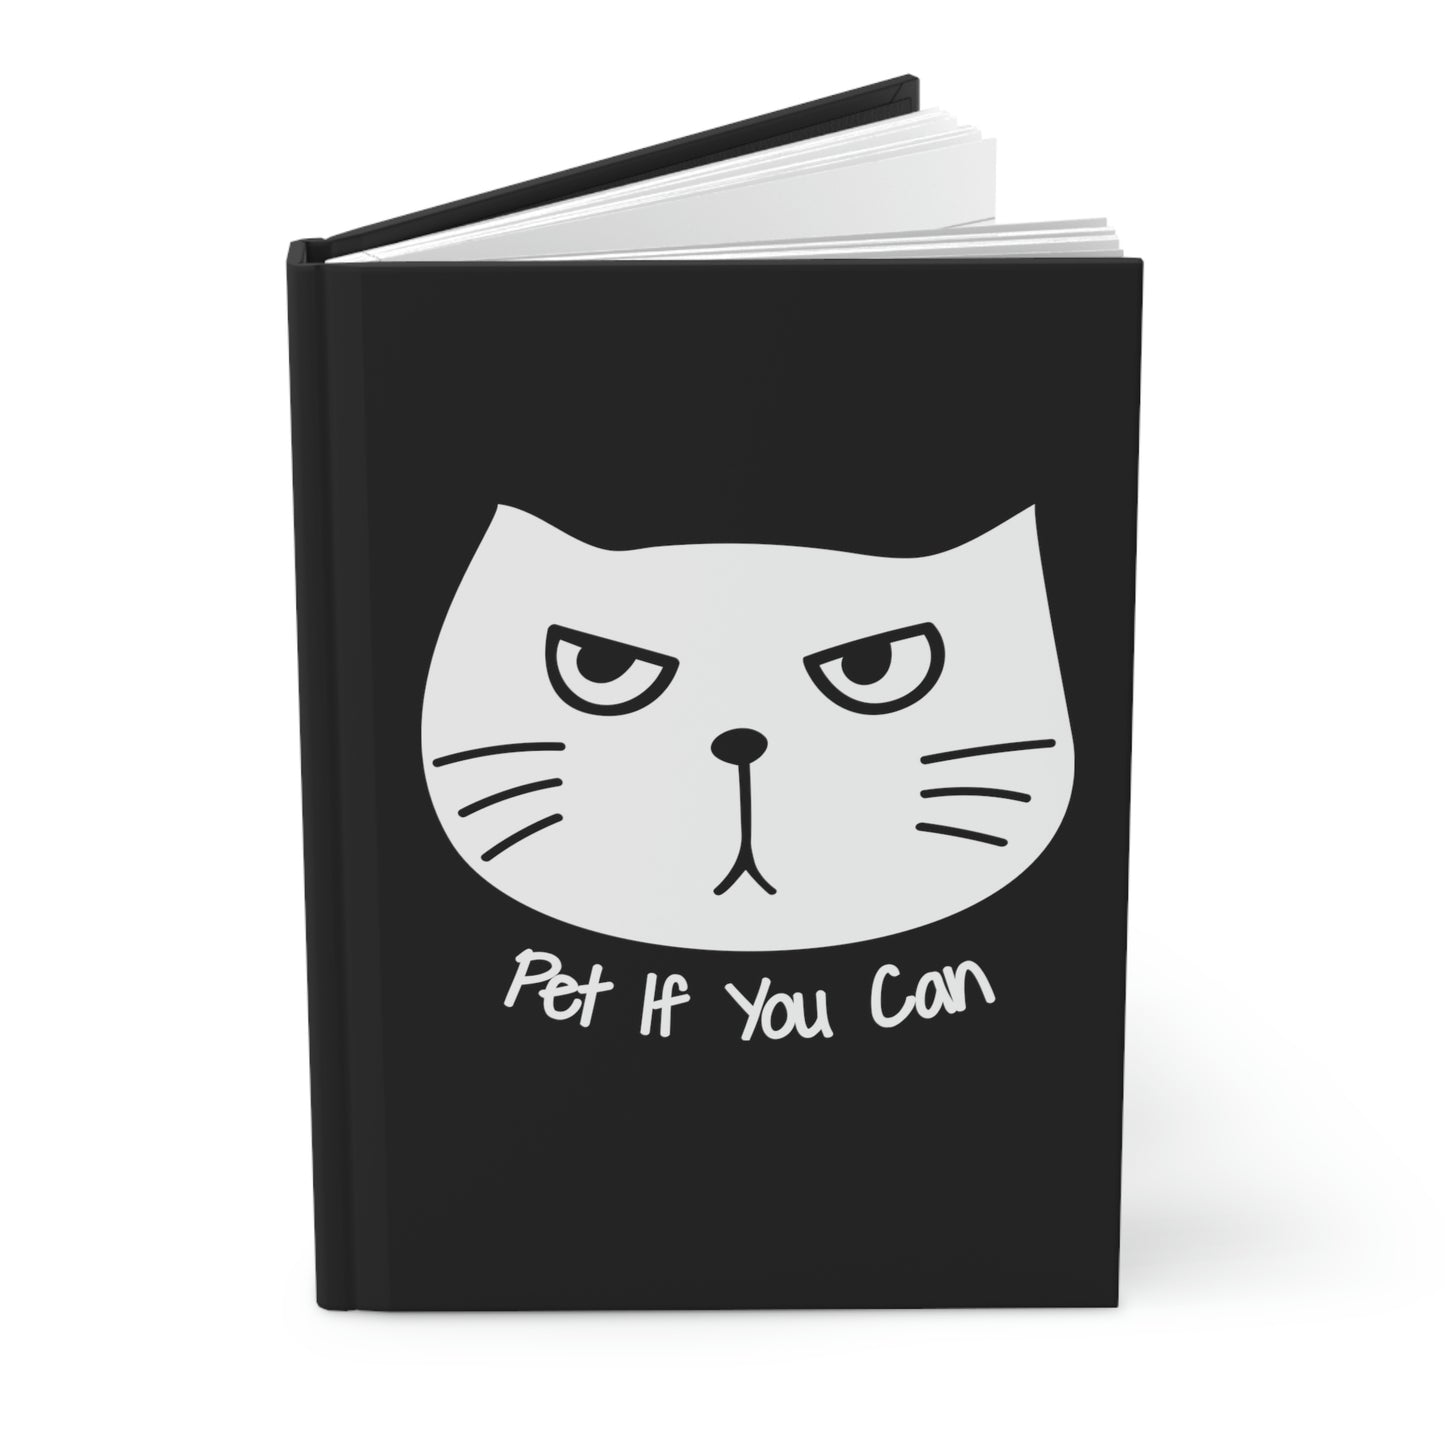 Funny White cat says "Pet If You Can" black Hardcover Journal Matte notebook, cat traveler notebook, Coworker cat Gift, cat lover gift